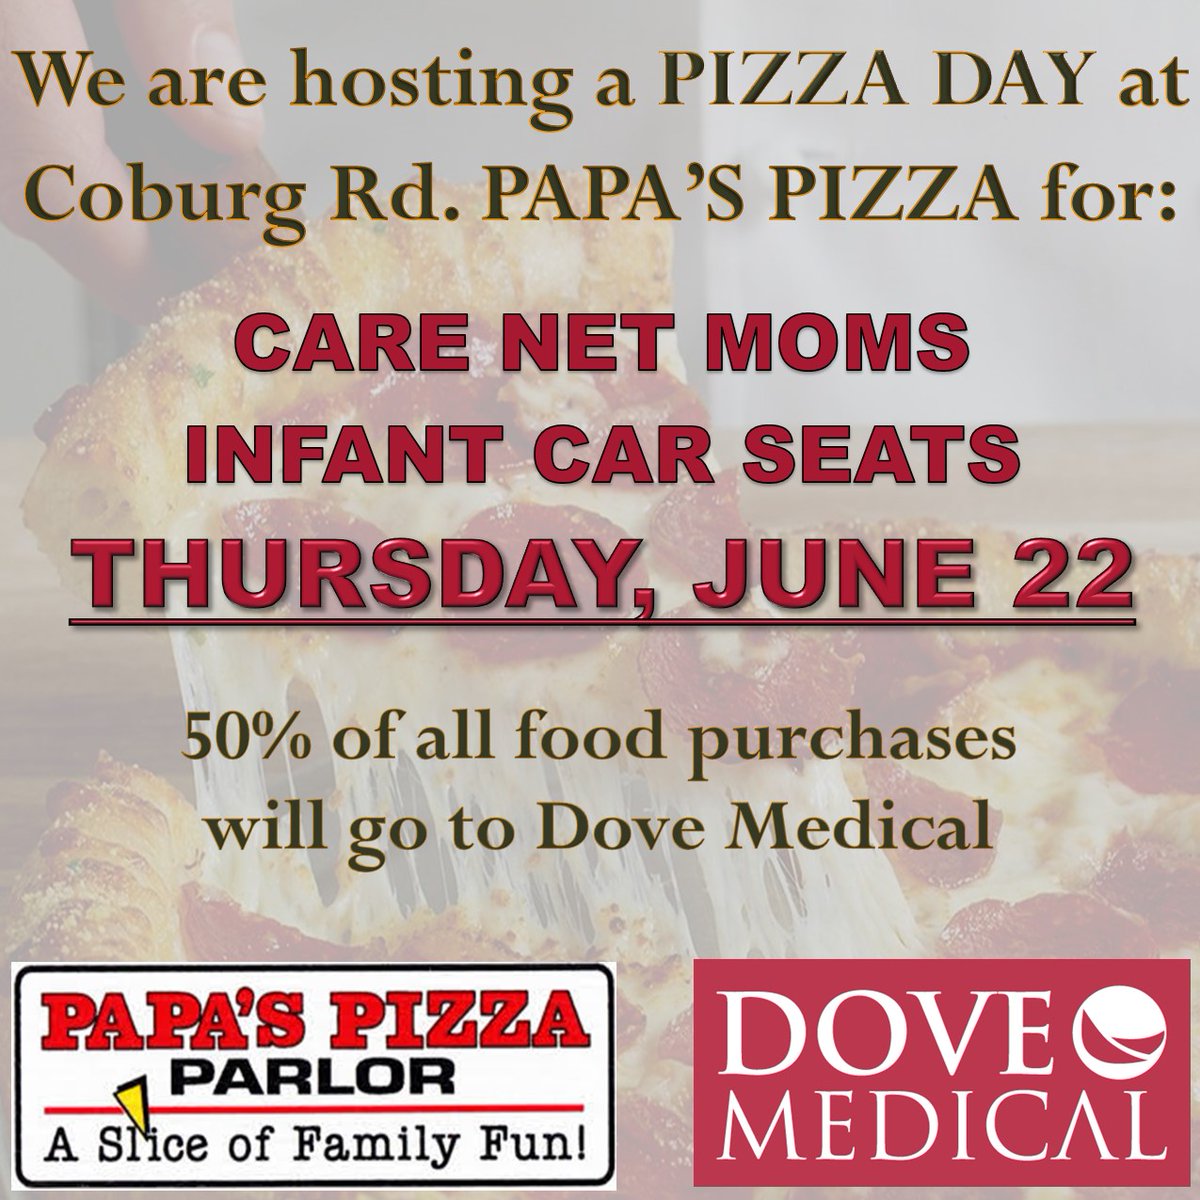 You can help provide an infant car seat to one of Dove Medical's patients. Buy a little 🍕 from the Coburg Road Papa's Pizza on June 22, and 50% your food purchase goes to Dove Medical. #pizzaday #pregnancydiagnosisclinic